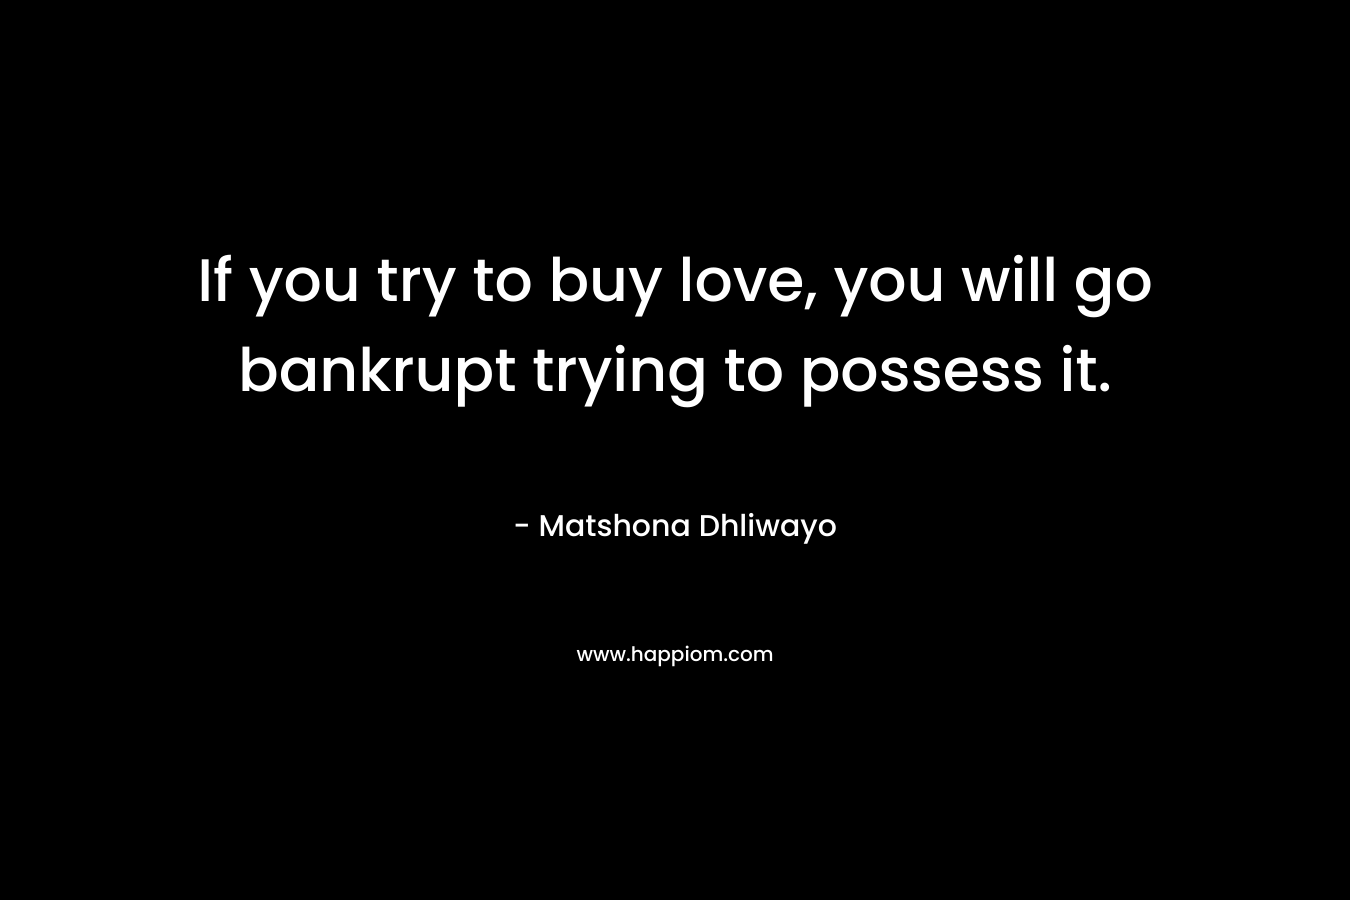 If you try to buy love, you will go bankrupt trying to possess it. – Matshona Dhliwayo